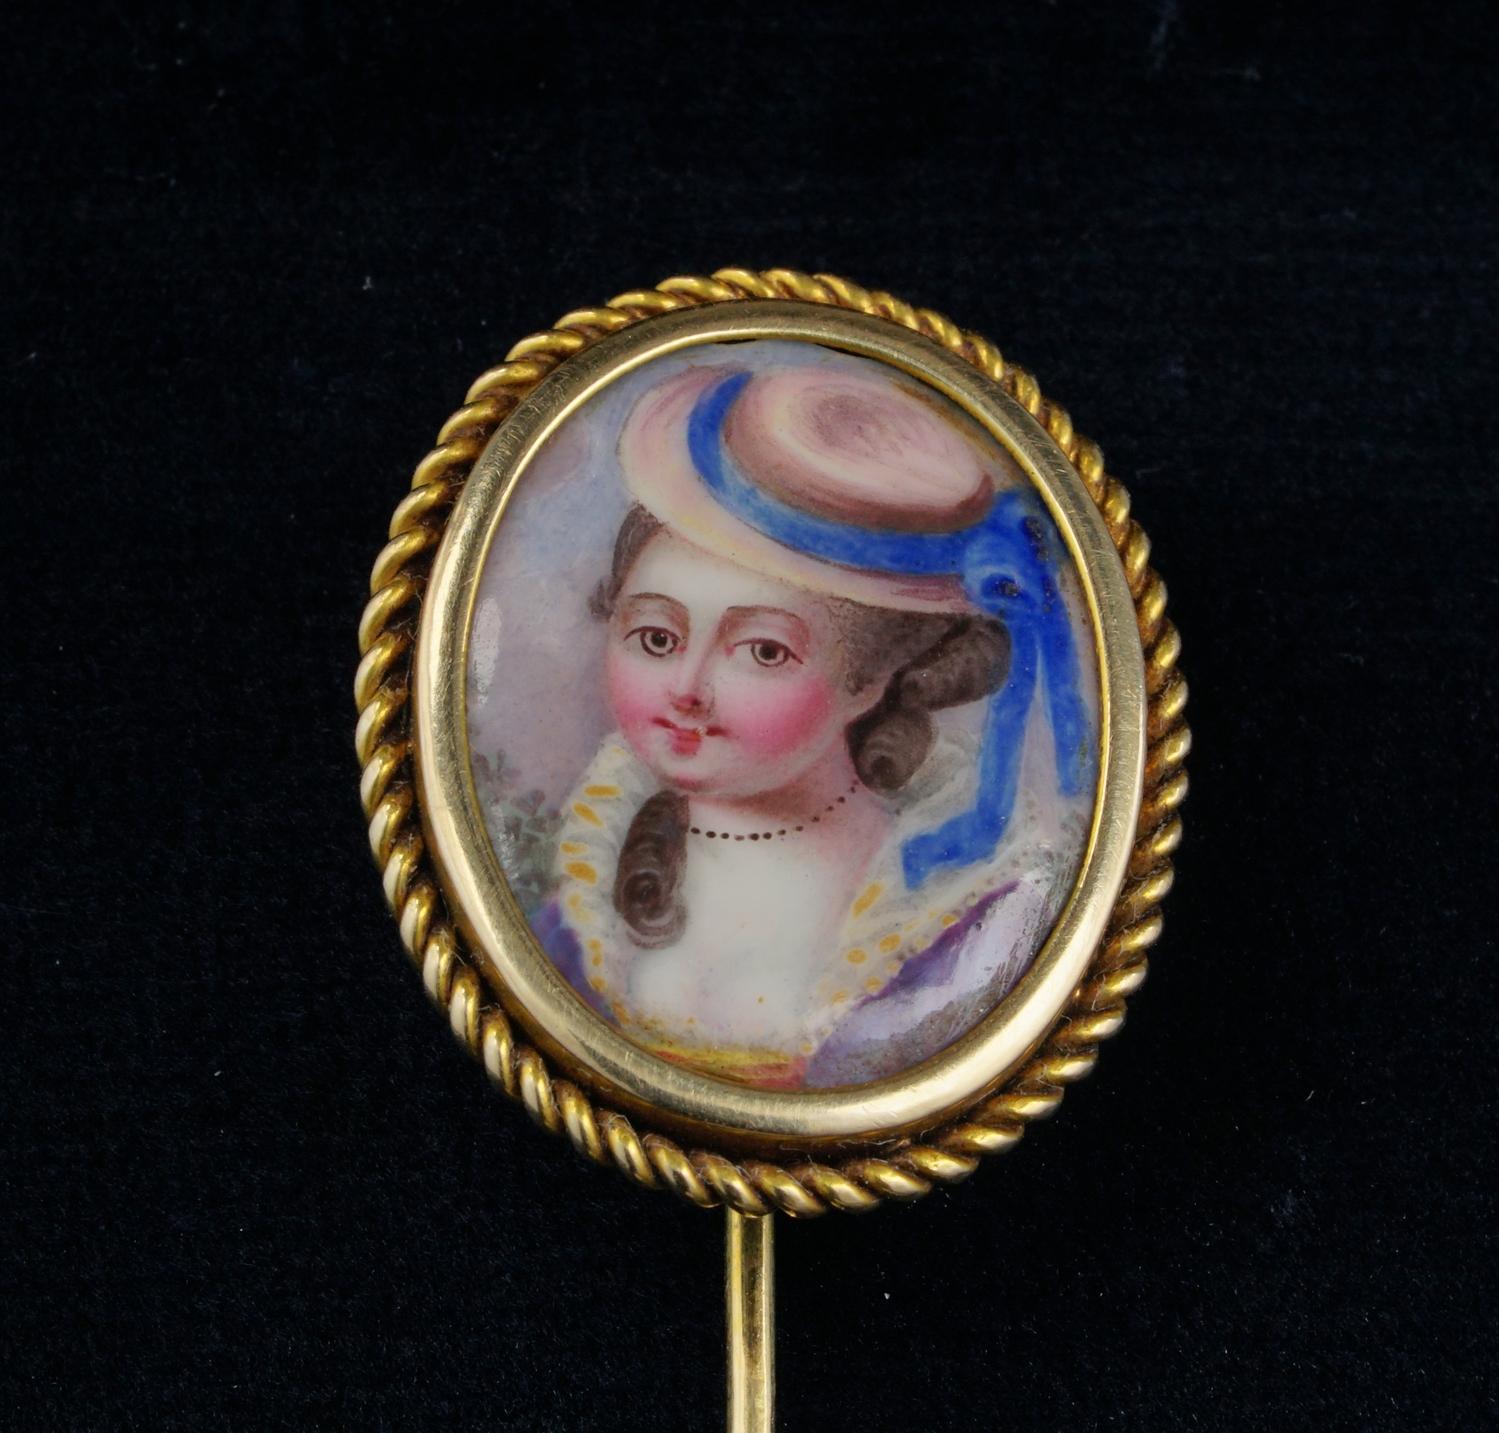 Sign of Elegance

Very fine quality portrait miniature from the Georgian period (1800 ca) mounted on solid 16 KT gold
Oval shaped with charming rope frame encircling a beautiful smiling lady in elegant clothes and hat, very high quality Swiss